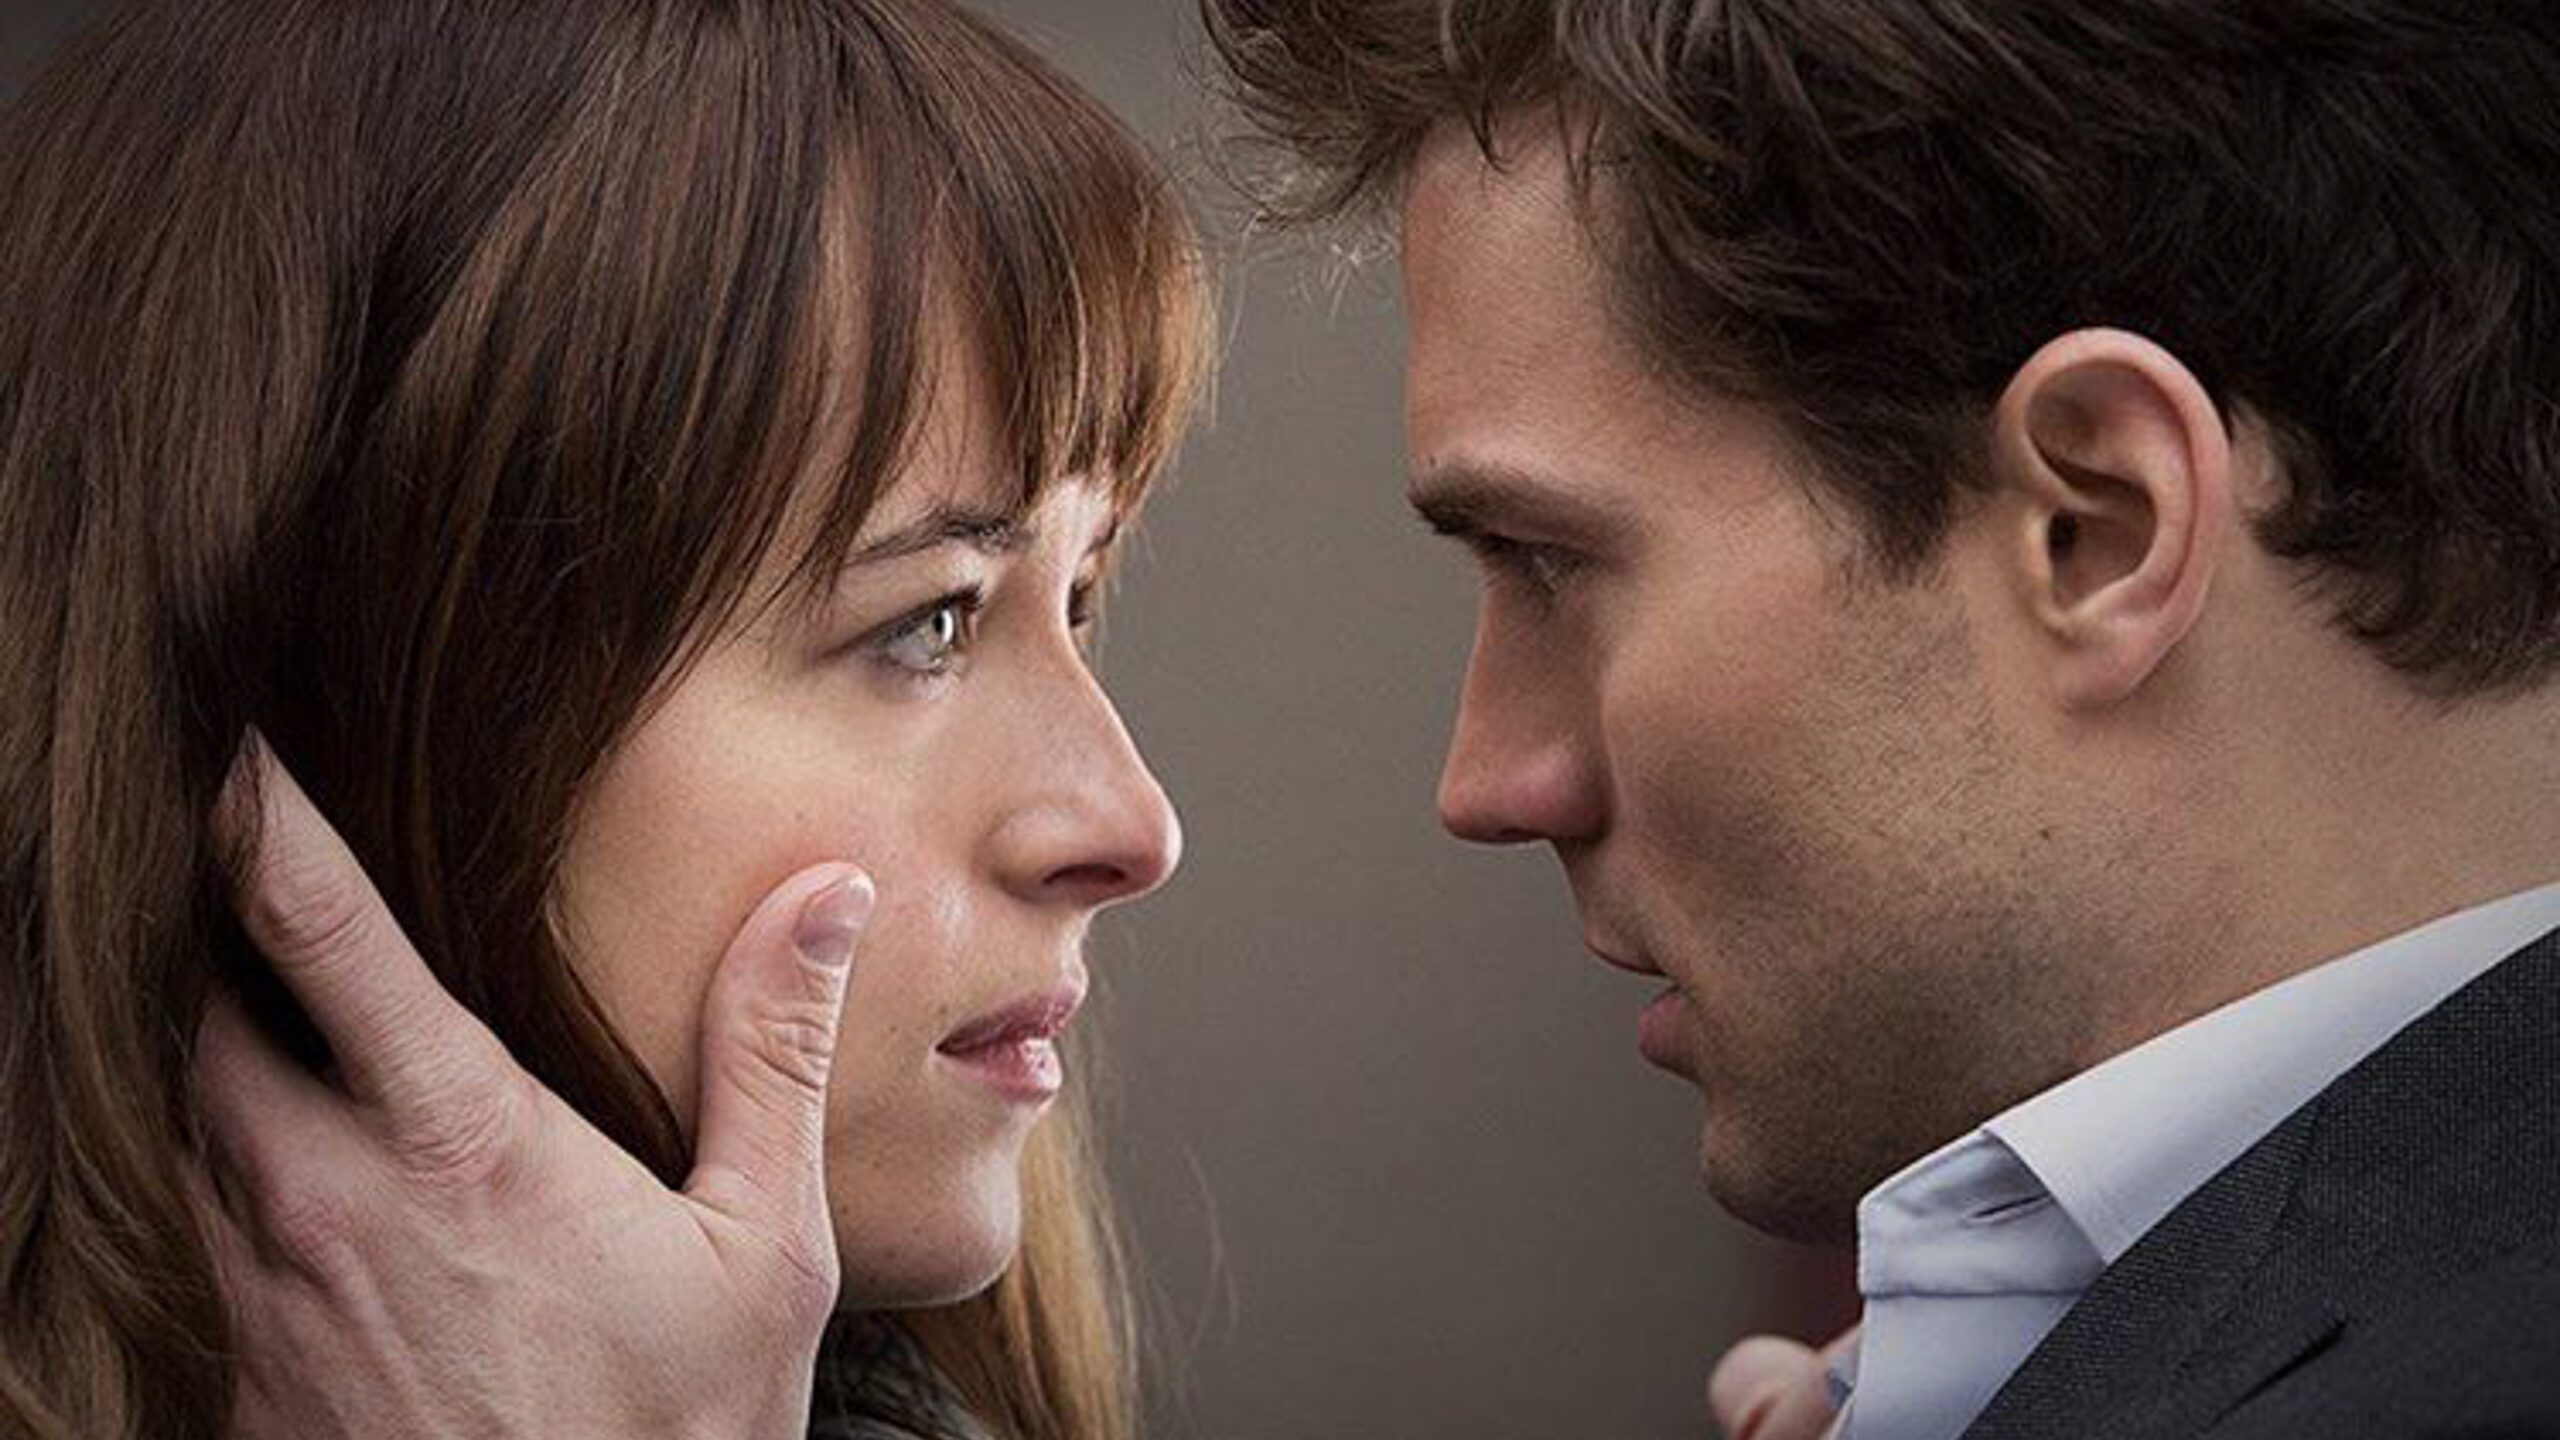 Movie reviews: What critics are saying about ‘Fifty Shades Darker’